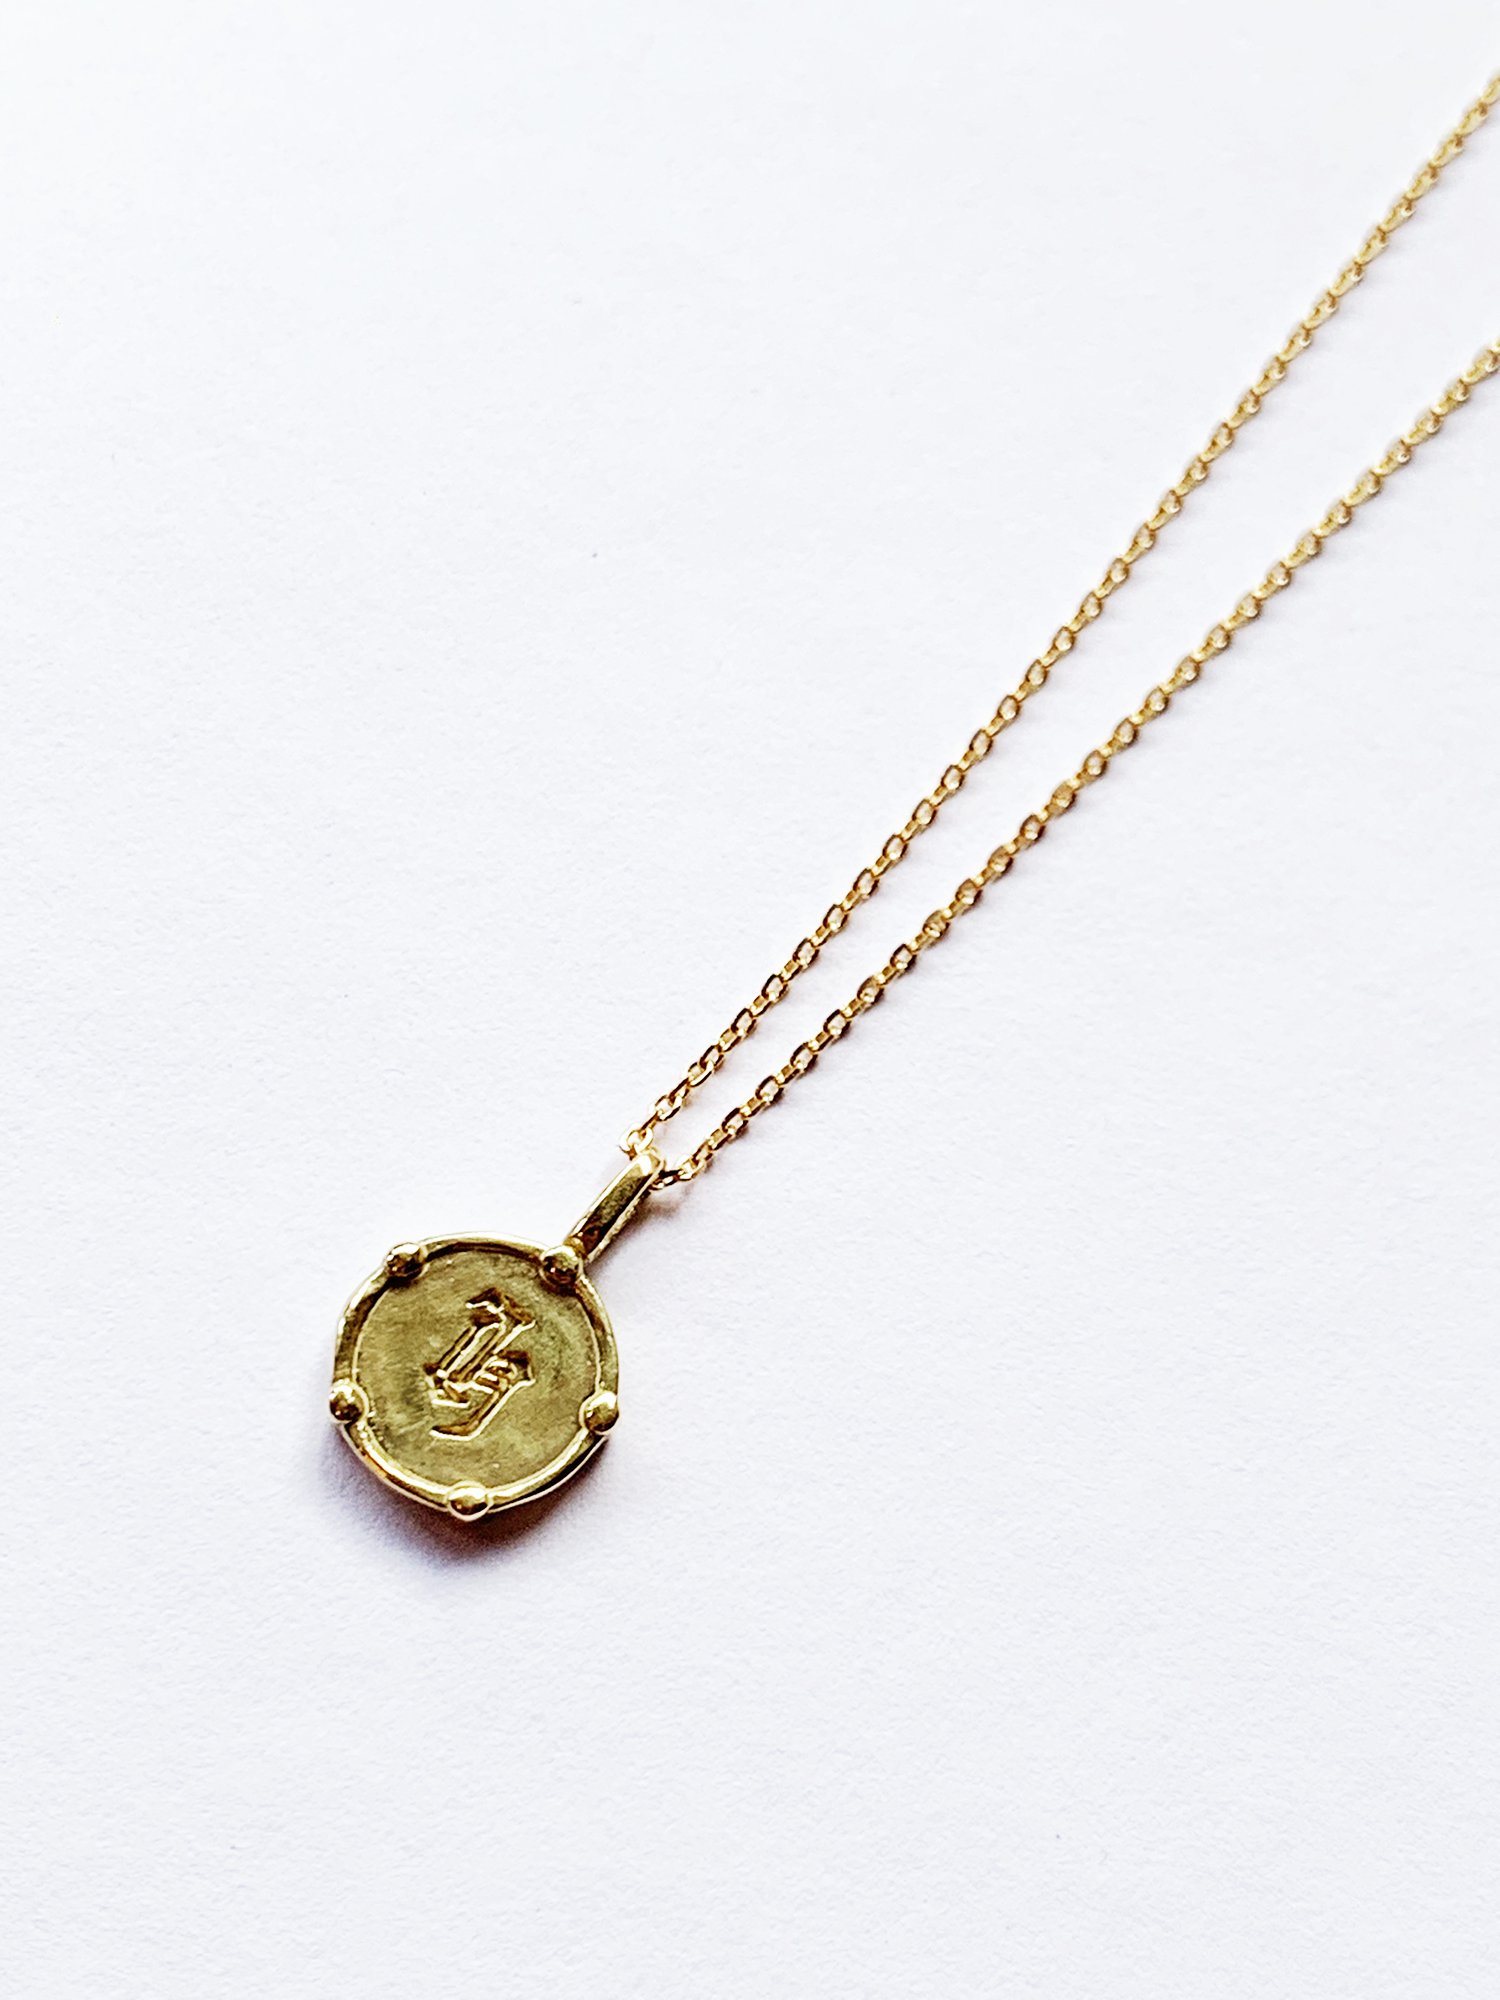 HELIOS / Blackletter coin necklace - GIGI Jewelry